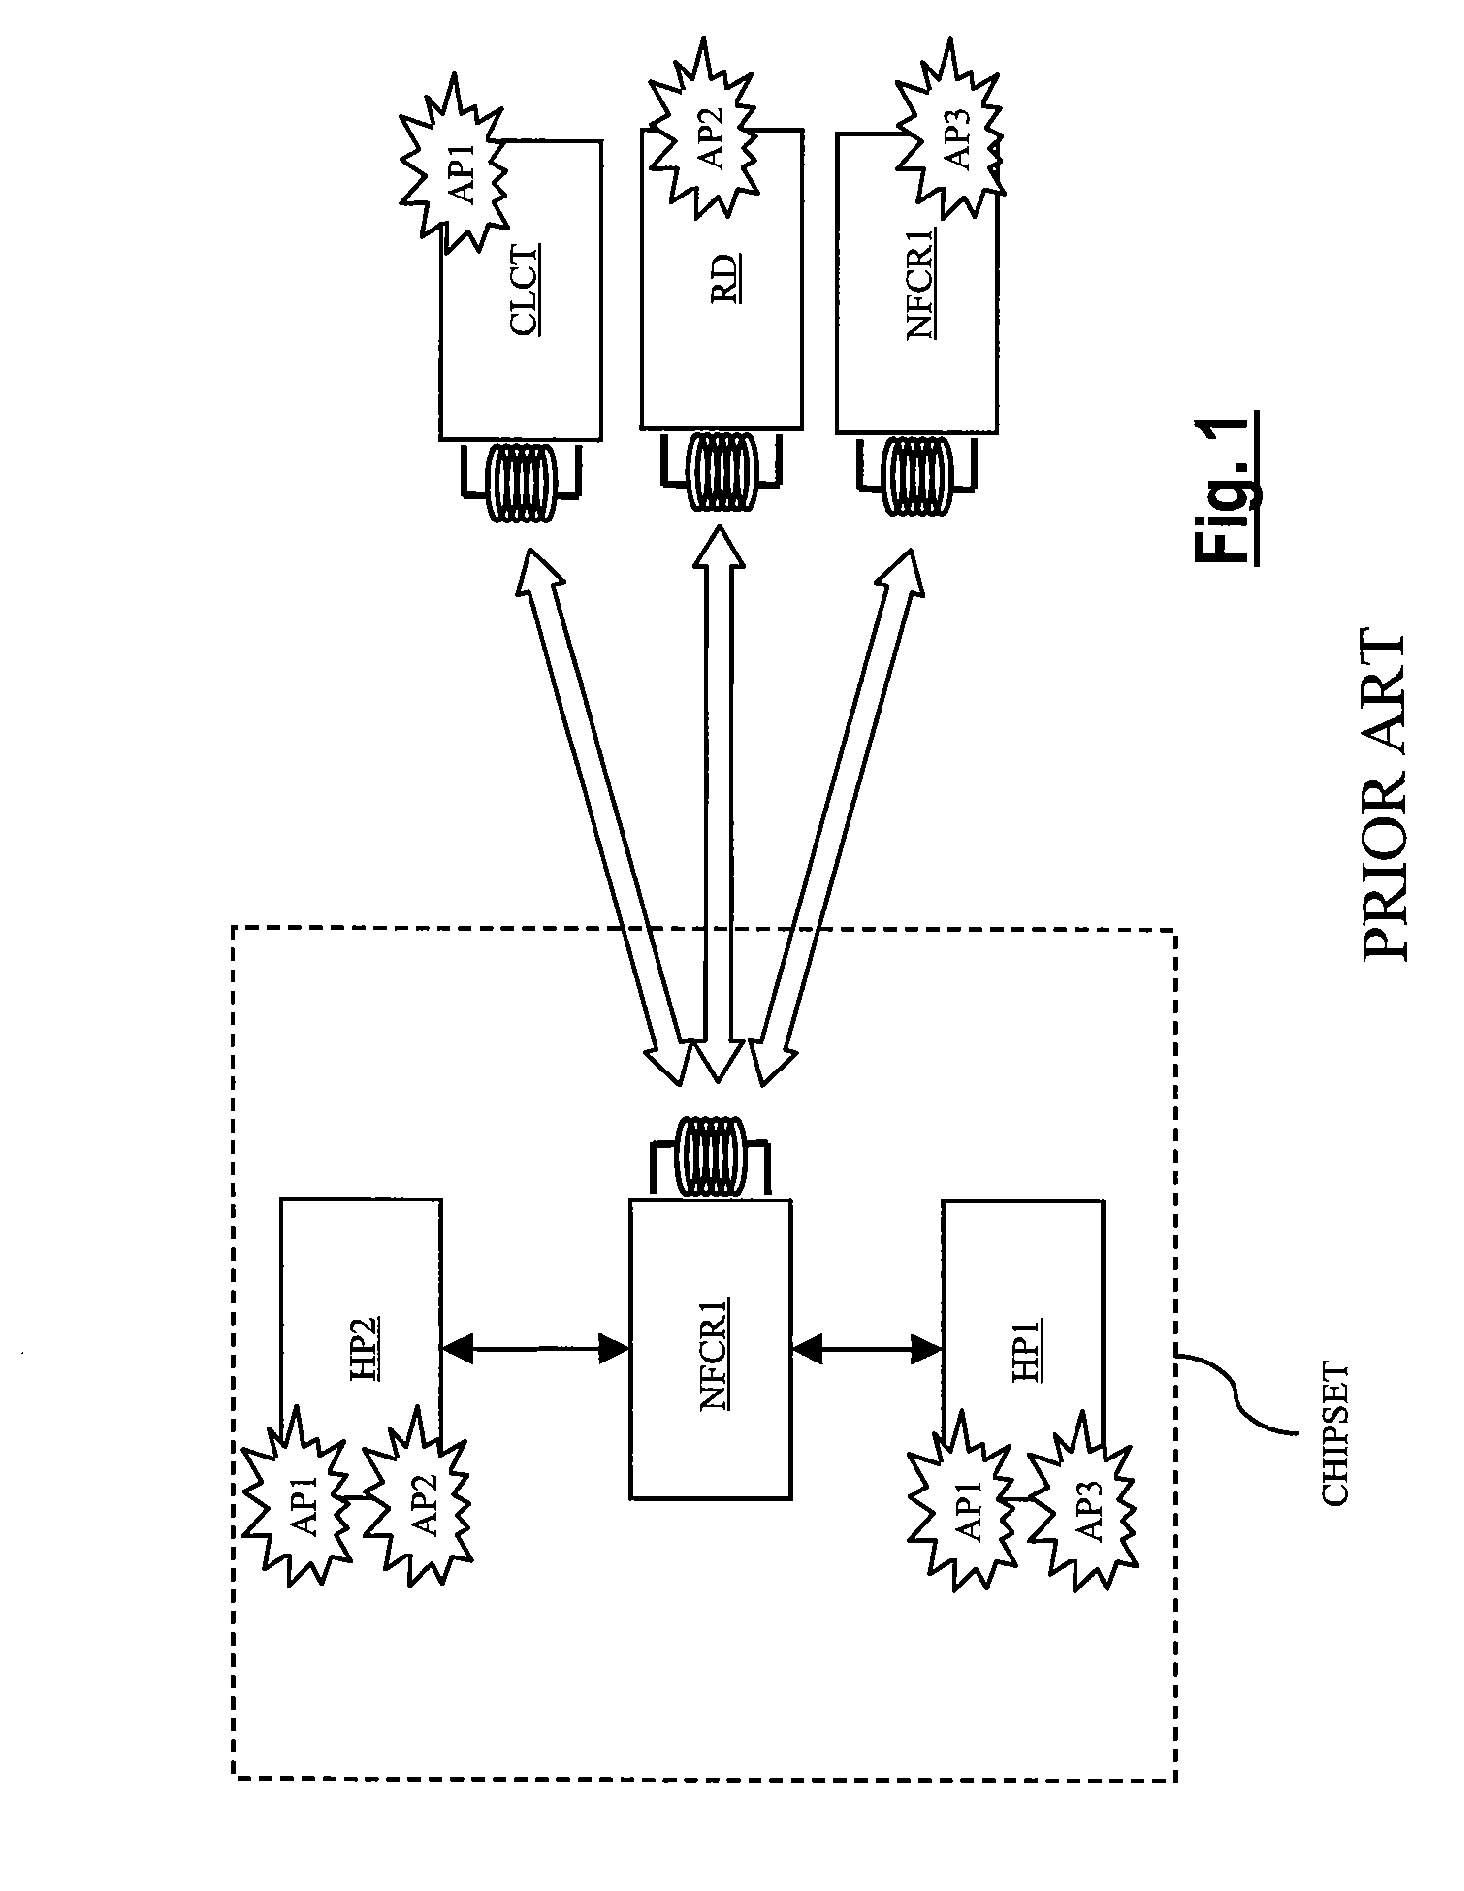 Method for routing incoming and outgoing data in an NFC chipset